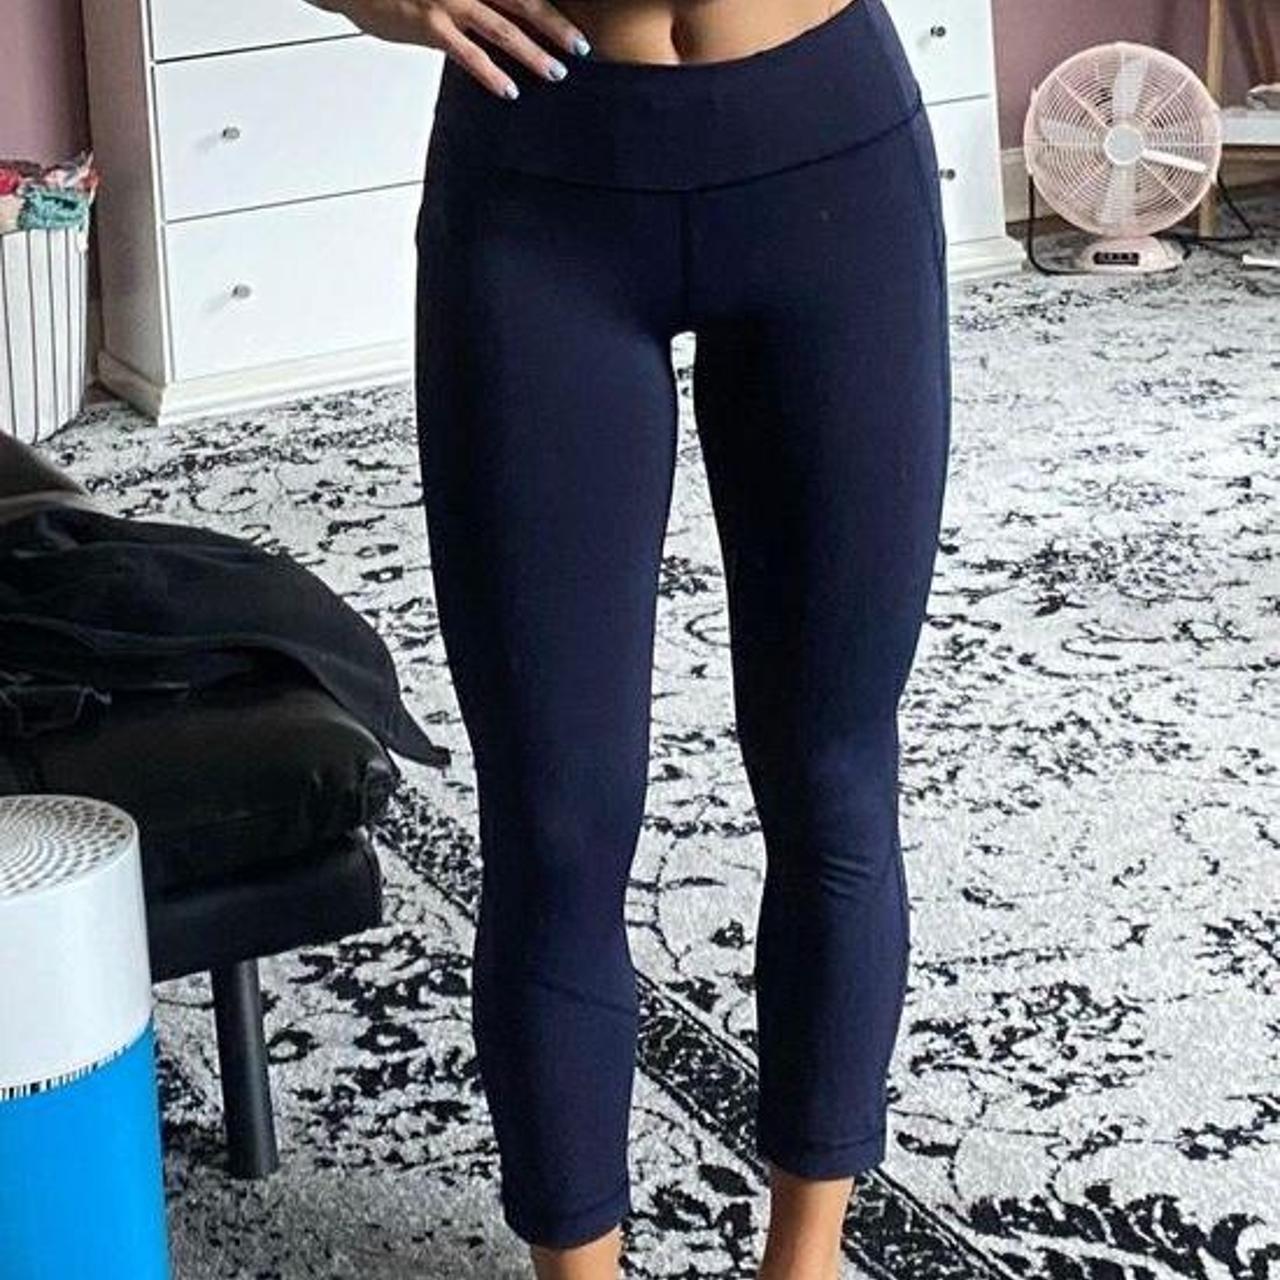 RBX mid rise leggings Navy blue with green/blue - Depop